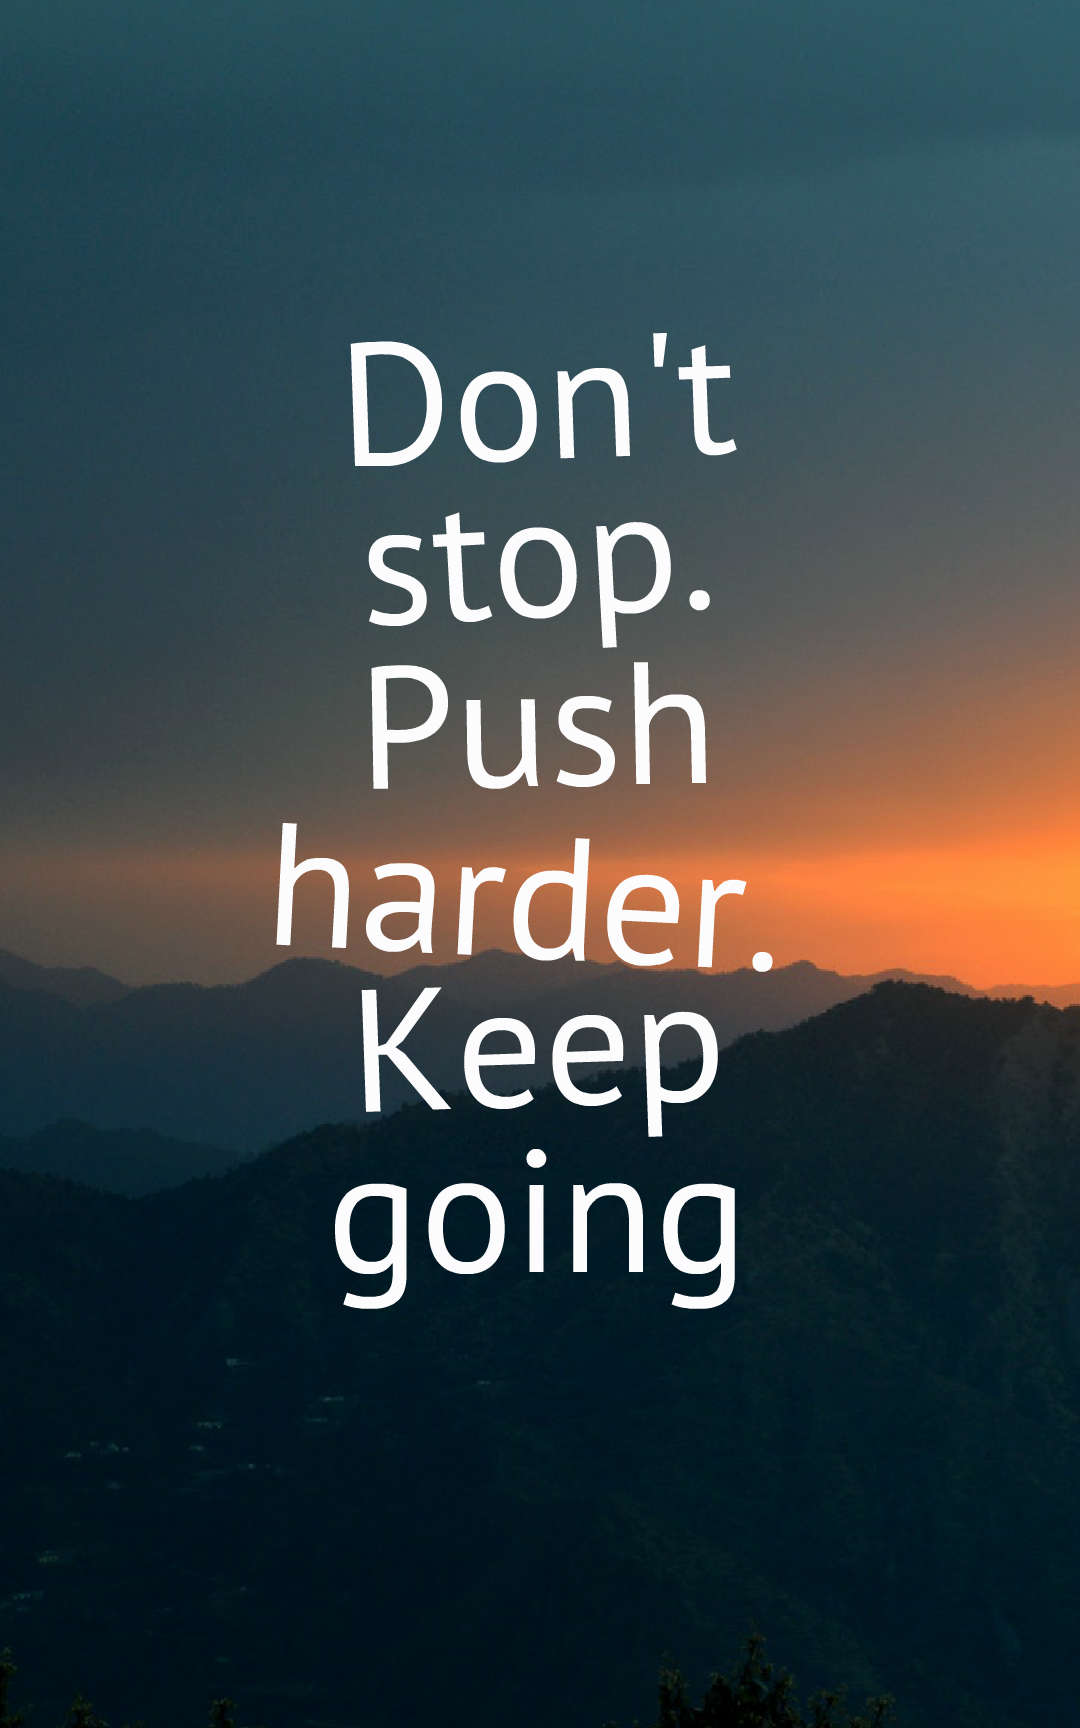 Don't stop. Push harder. Keep going